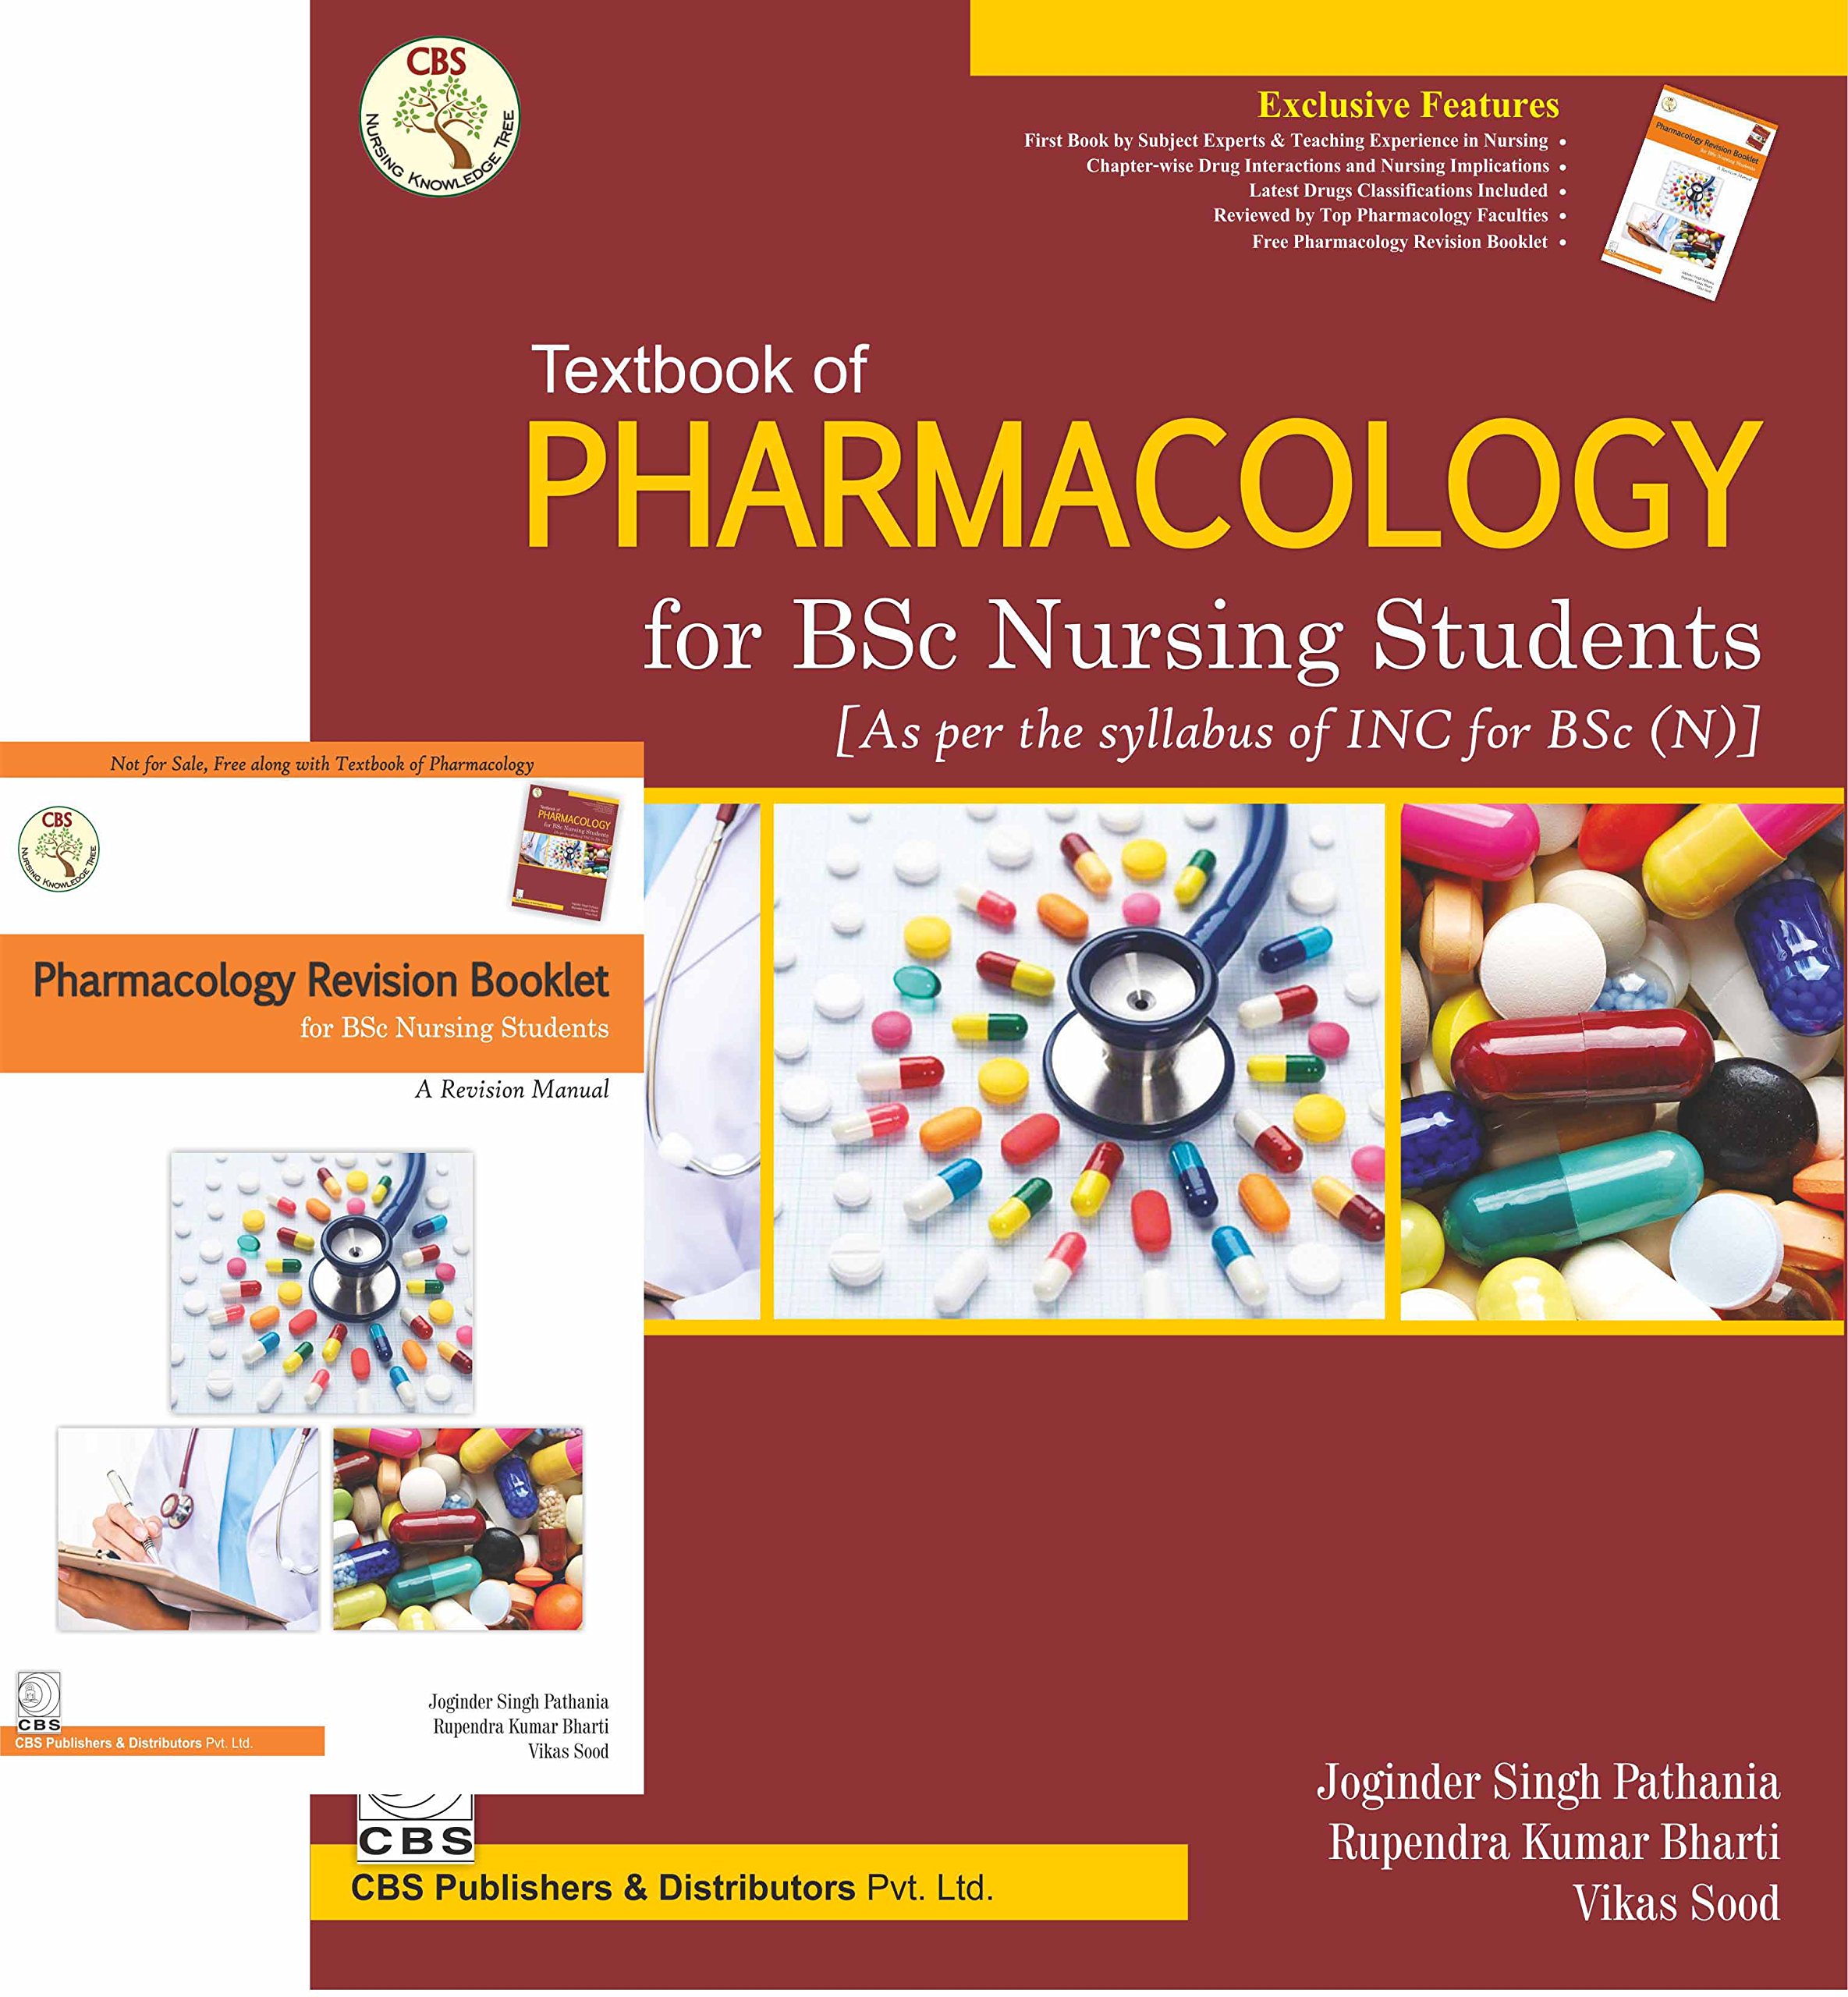 Textbook Of Pharmacology For Bsc Nursing Students Plus Pharmacology Booklet (Pb)